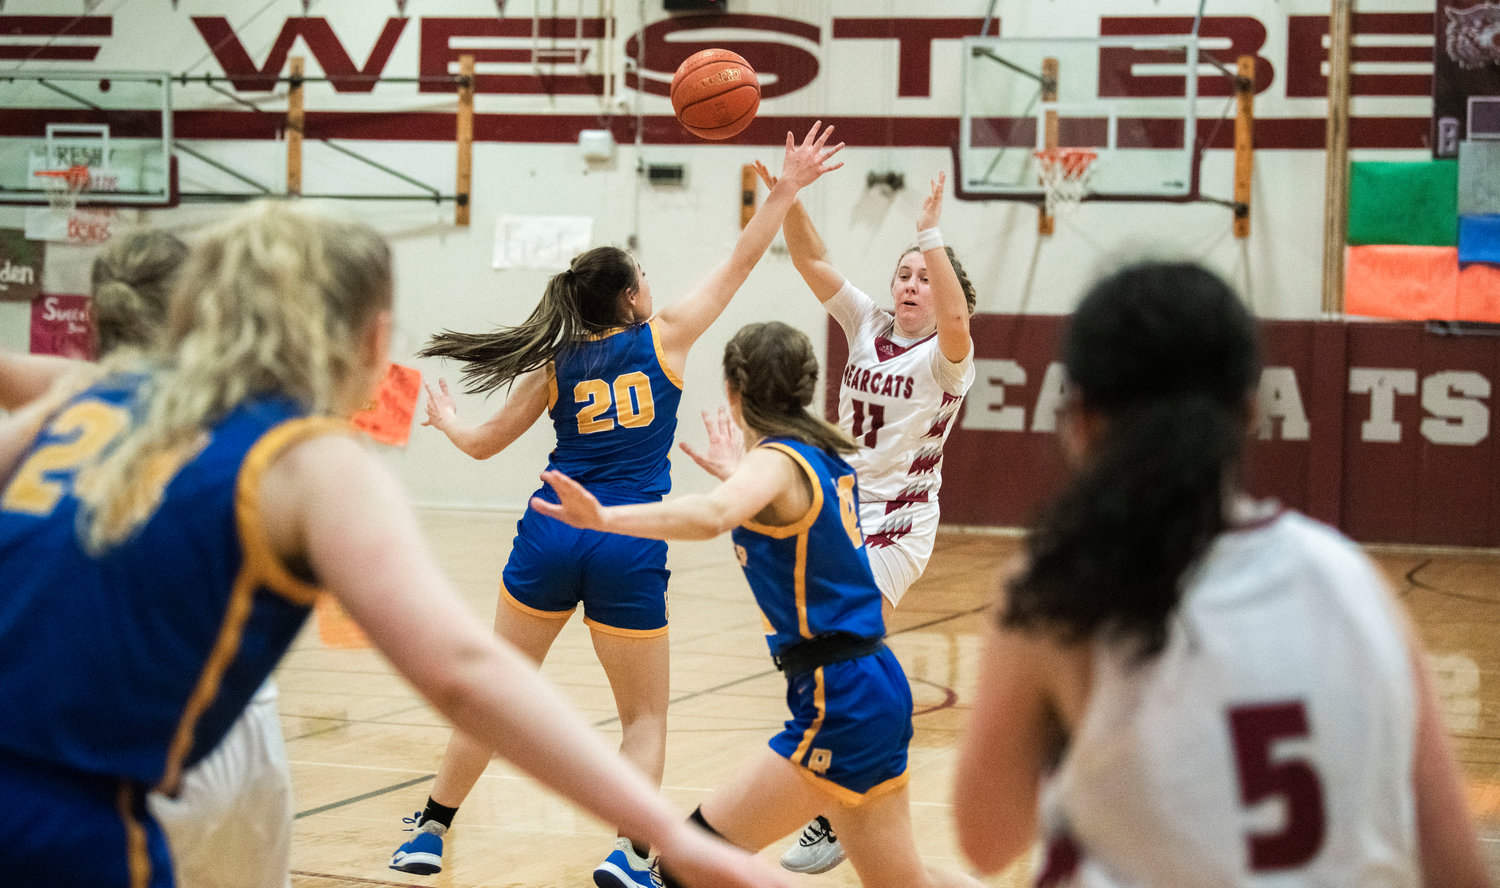 W.F. West’s Lena Fragner (11) looks to pass during a game against Rochester in Chehalis on Jan. 5.